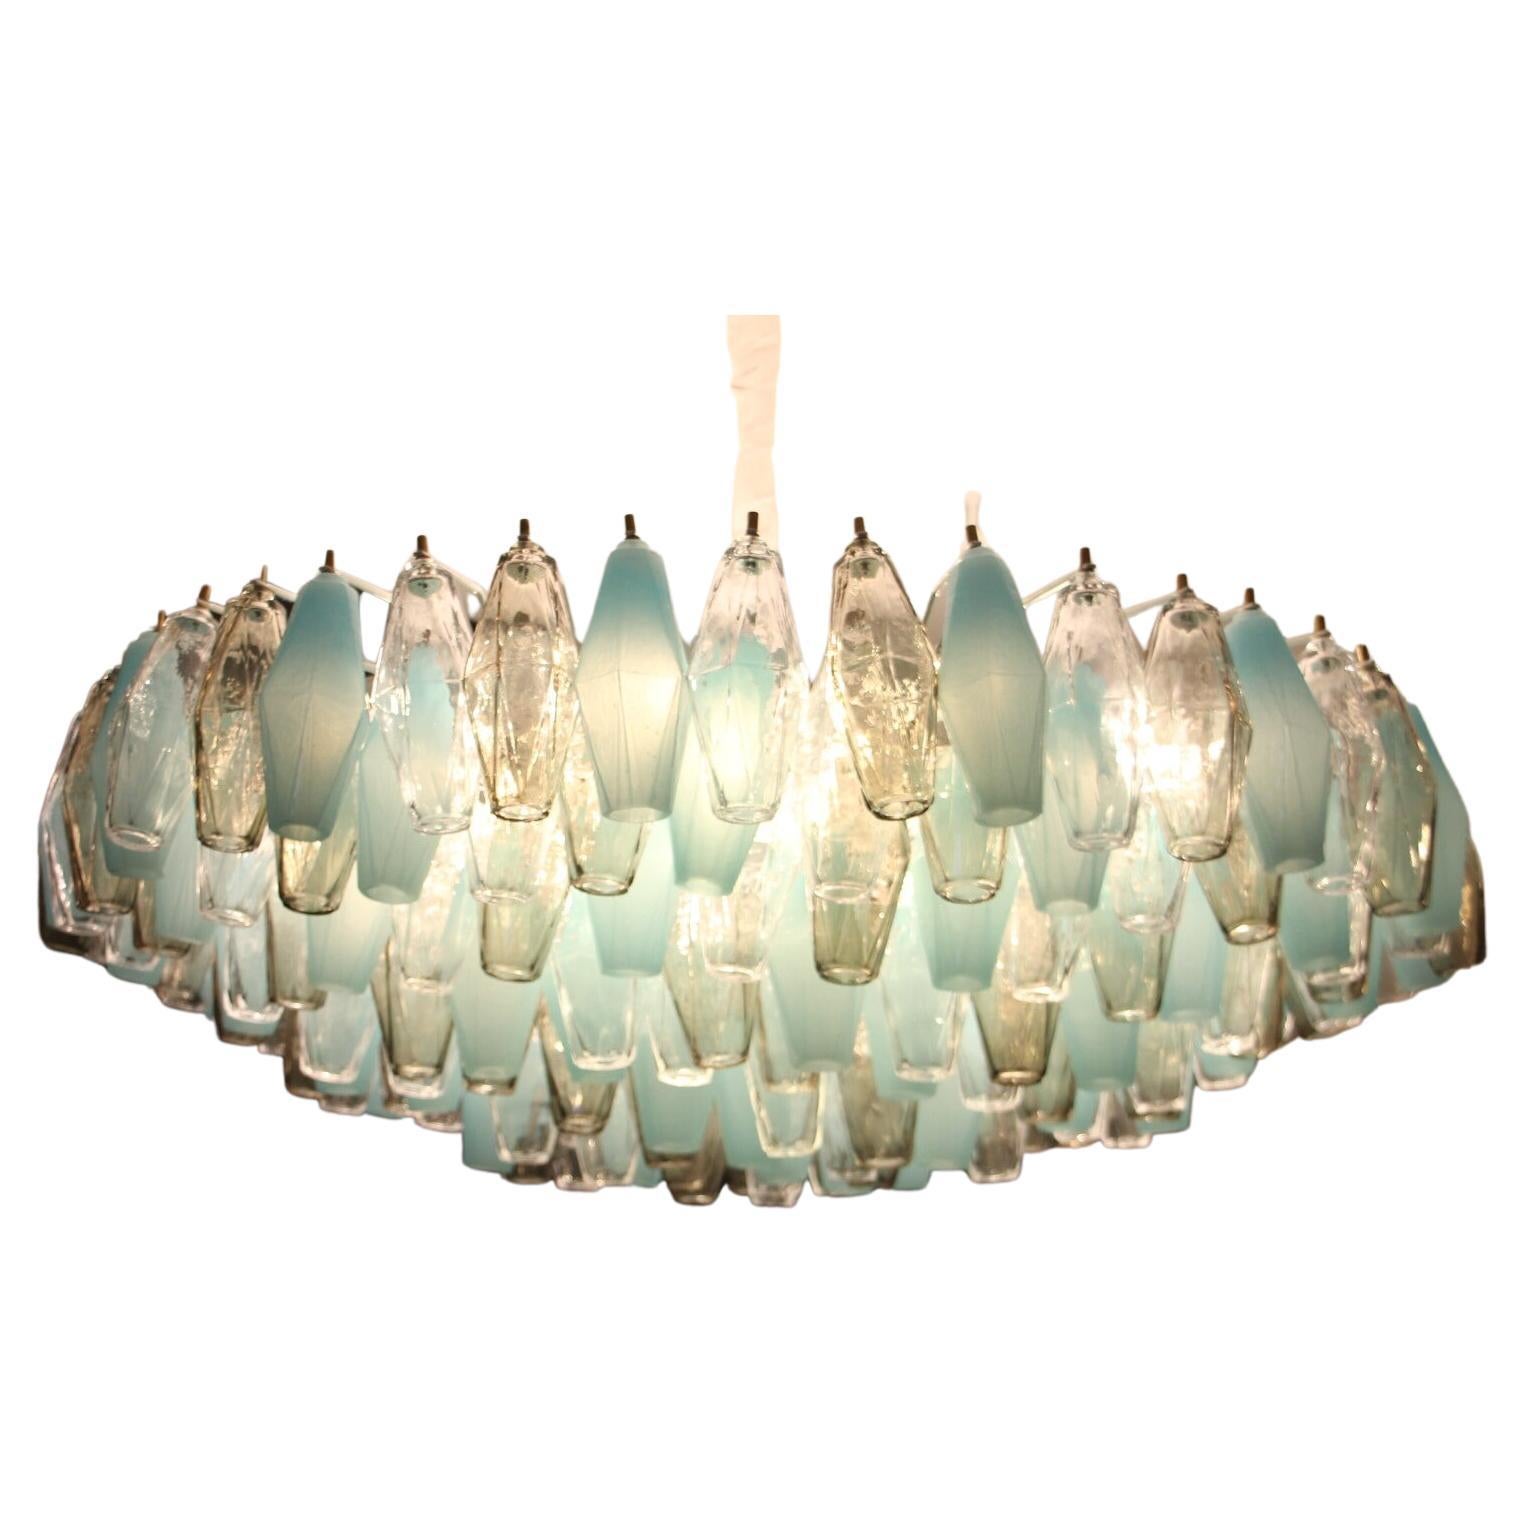 This beautiful chandelier or flush mount features 193 pieces of Murano glass poliedri pieces. Each piece of glass has been made individually by hand in Murano and shows abstract diamond faceted shape. Colors of glass are very particular as they are